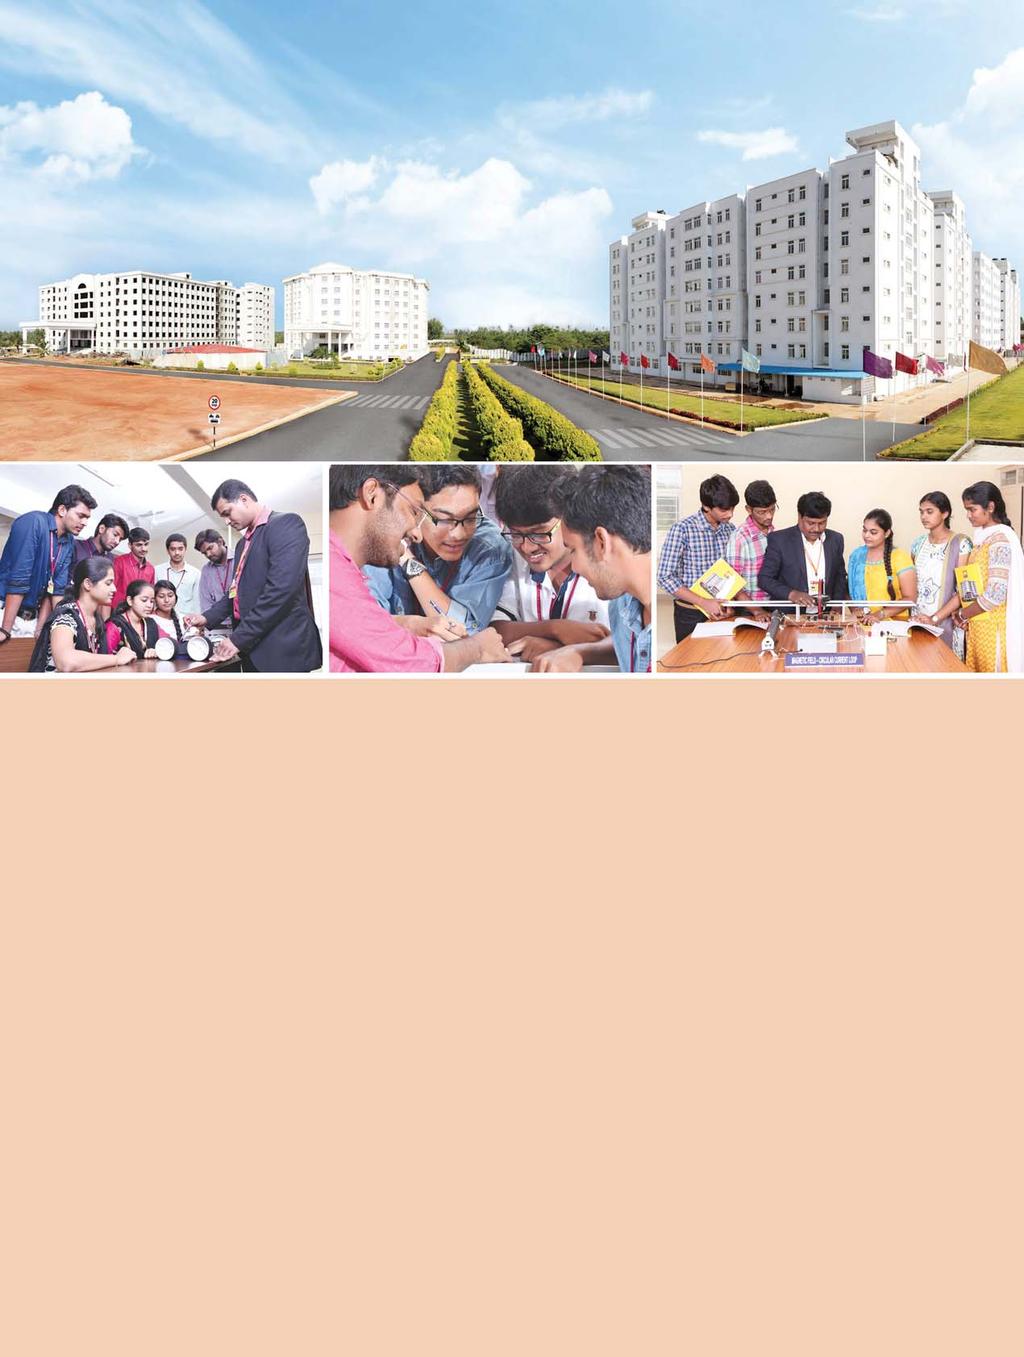 BENGALURU CAMPUS - KARNATAKA STATE GITAM School of Technology, Bengaluru campus, established in 2012 offers programs of international standards in technology using its excellent educational expertise